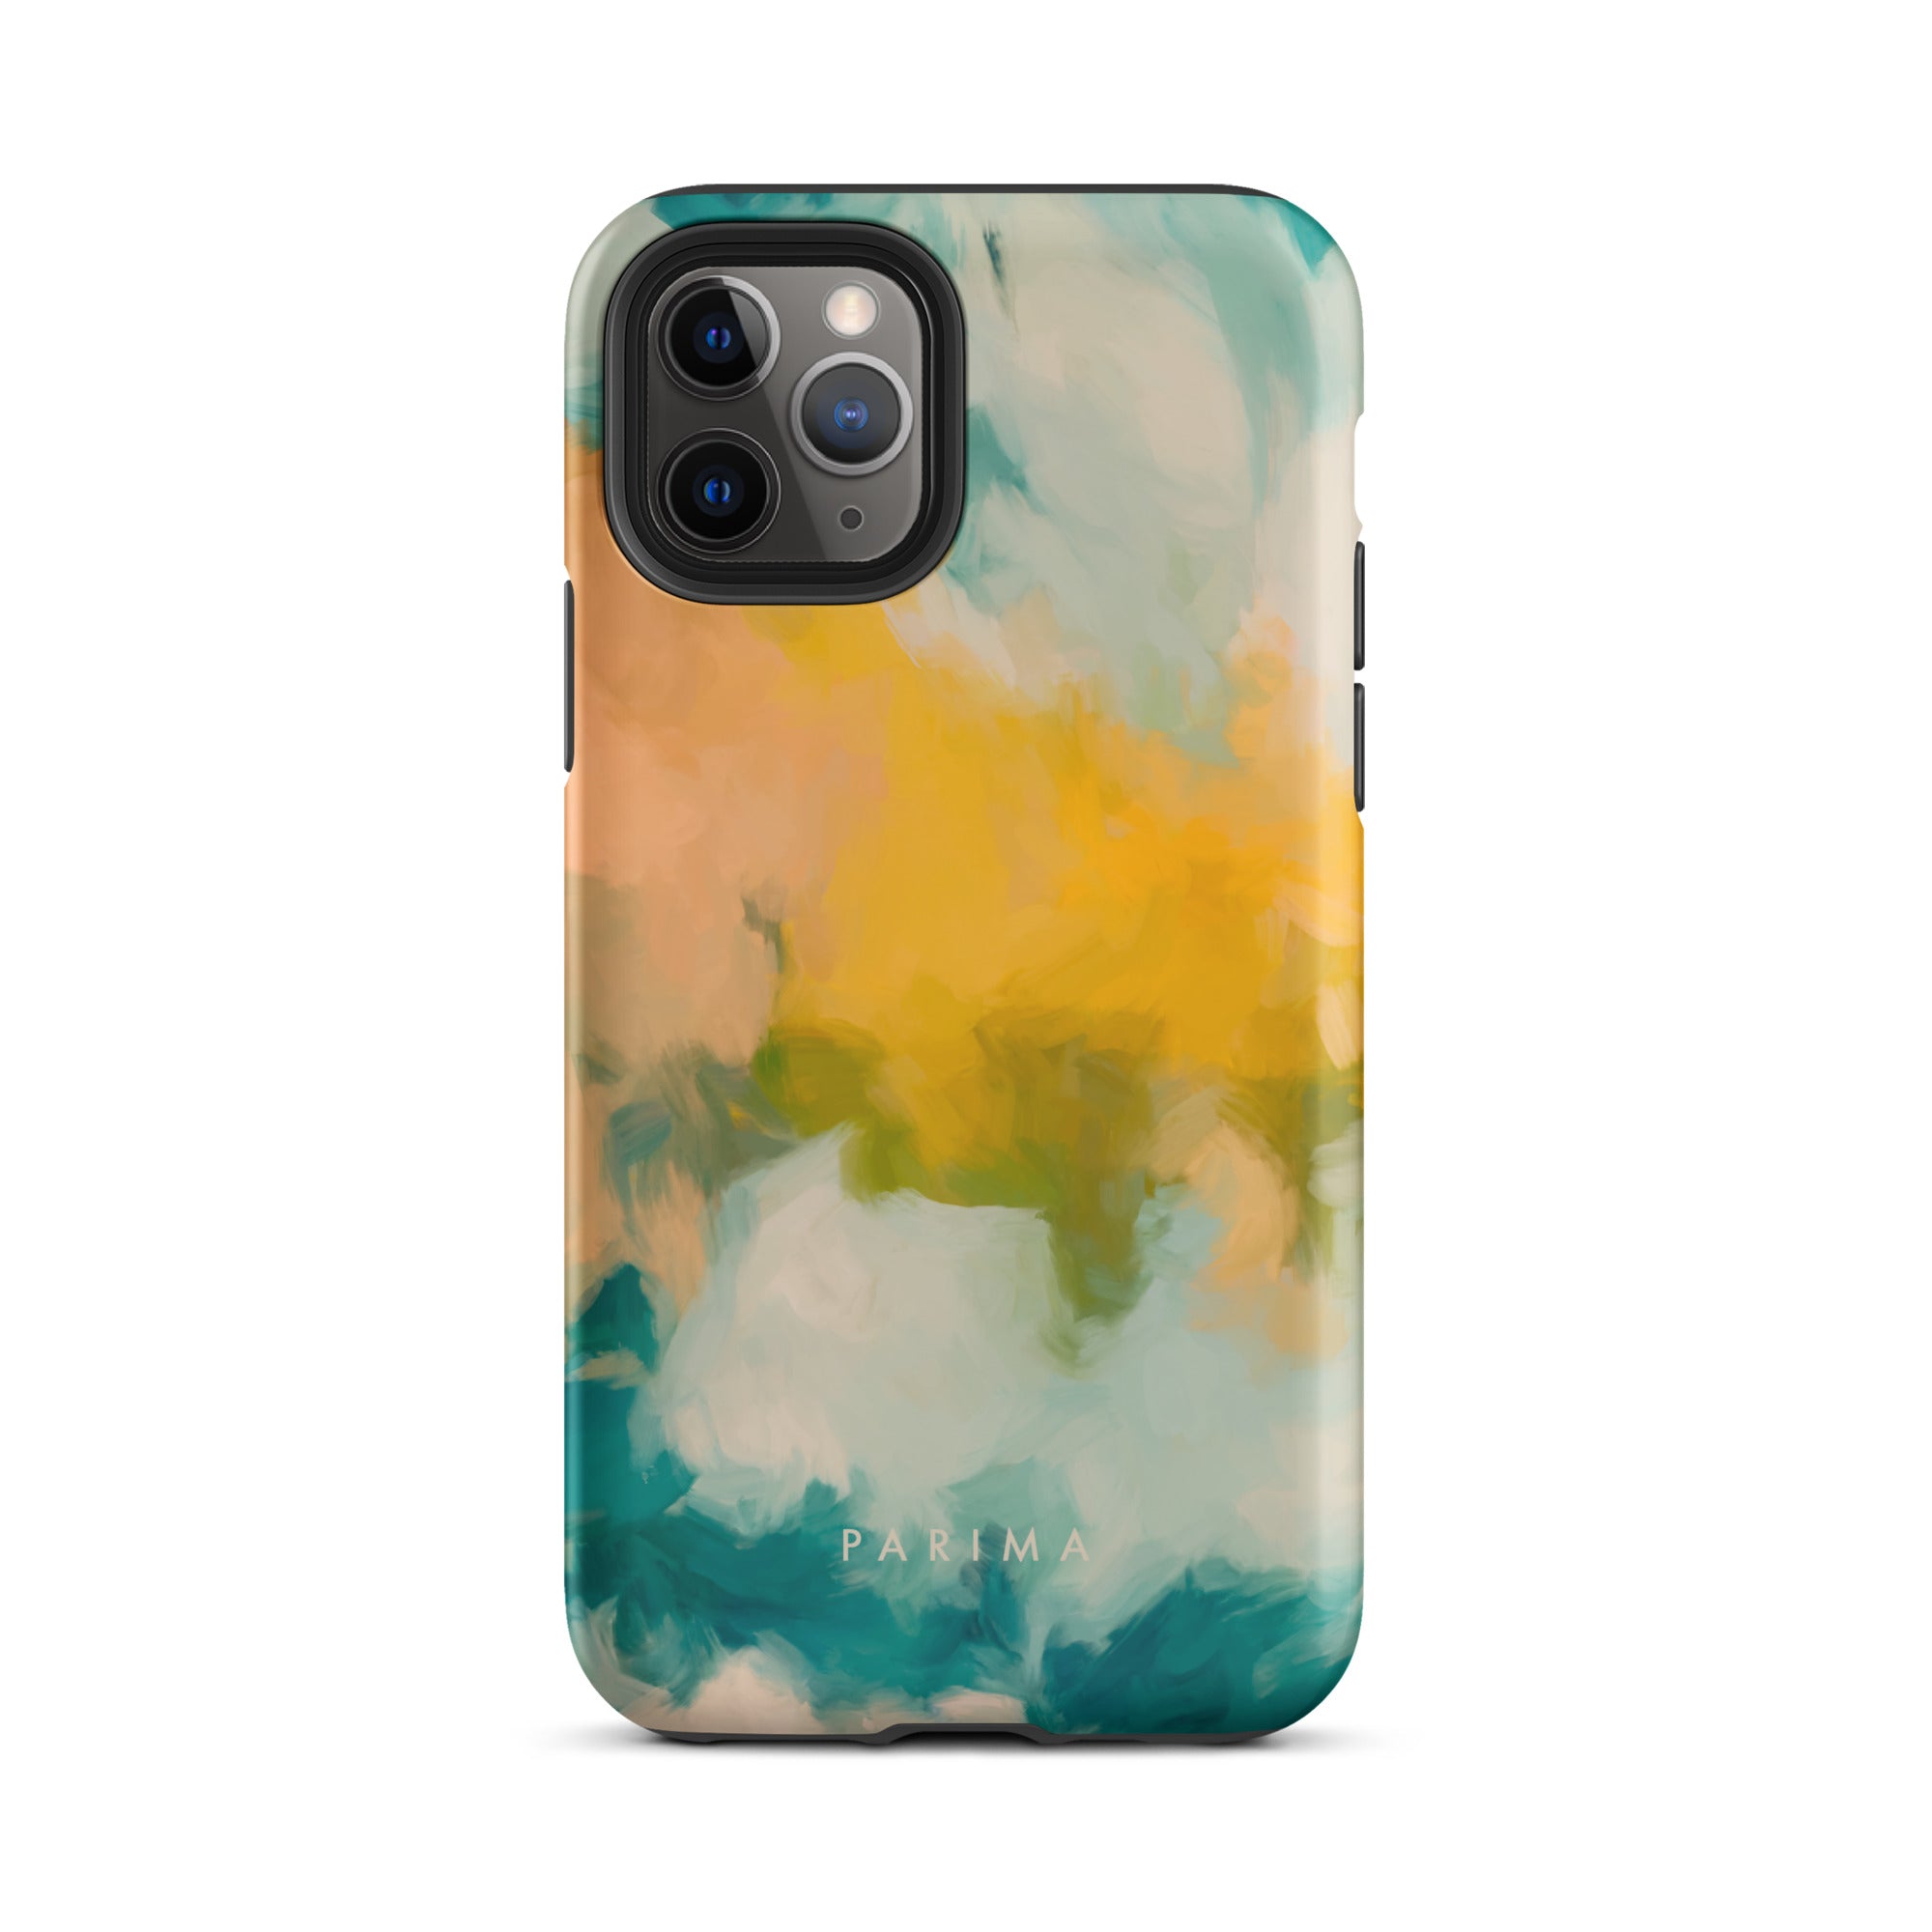 Beach Day, blue and yellow abstract art - iPhone 11 Pro tough case by Parima Studio